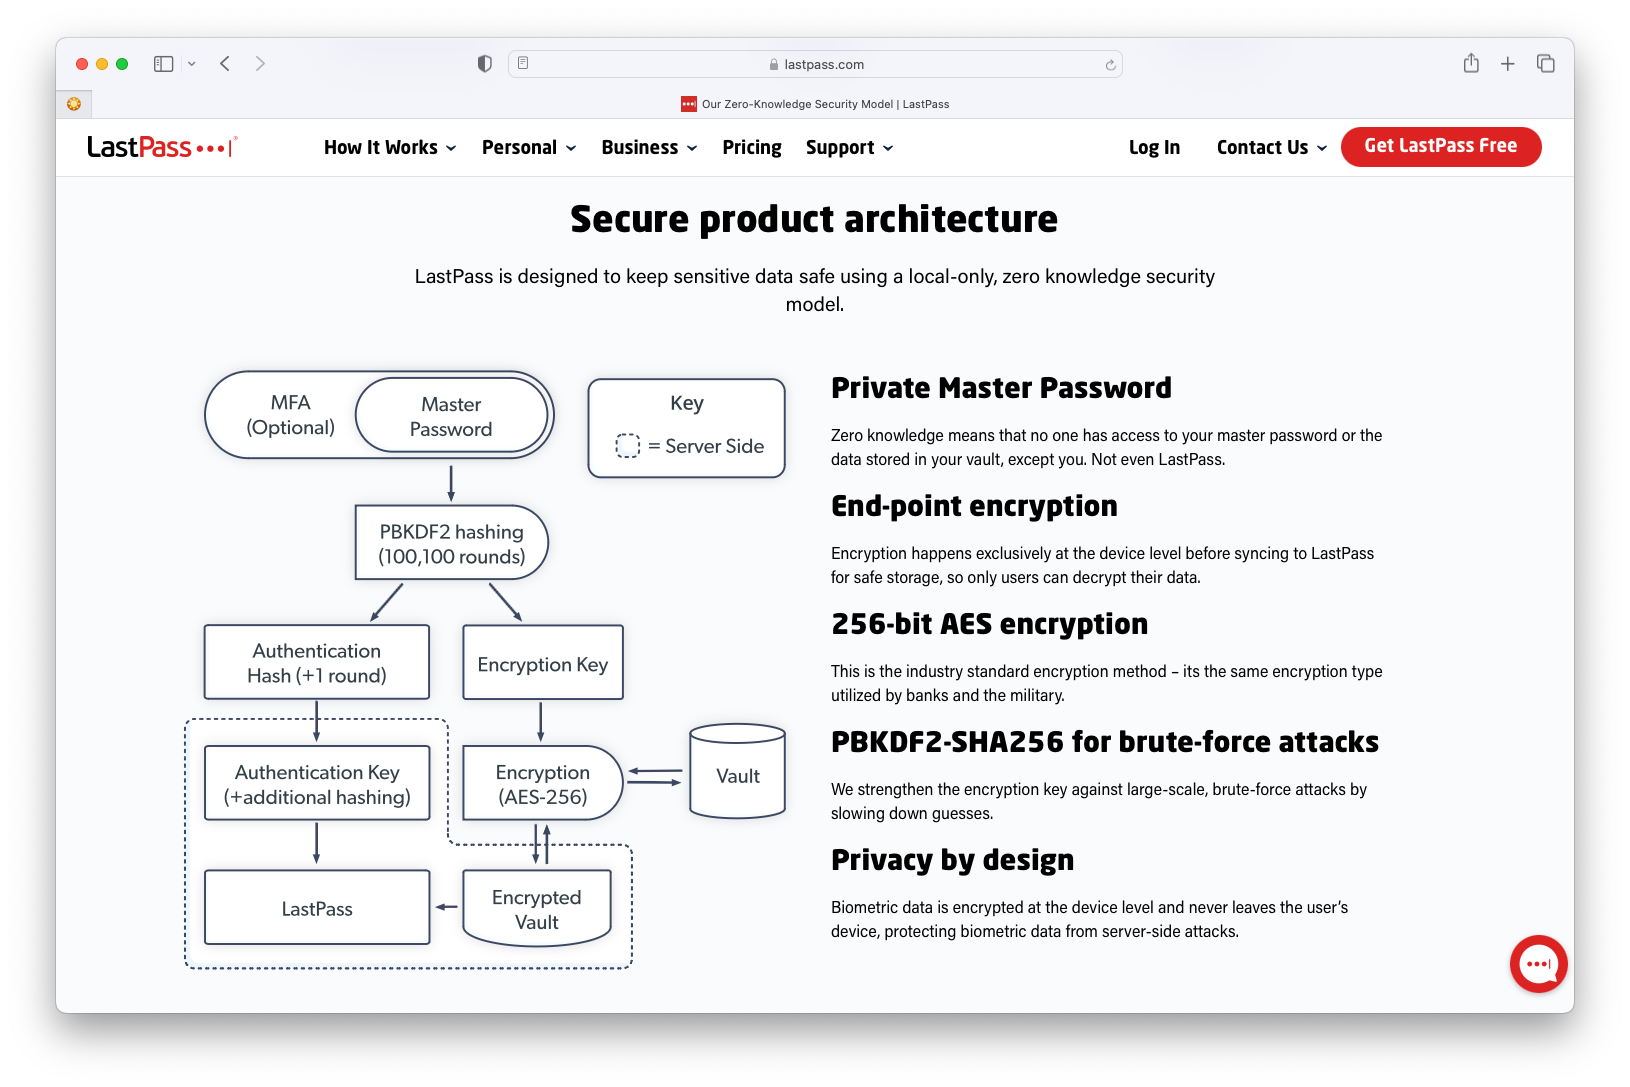 Screenshot of LastPass’ ‘secure product architecture’ from their website.